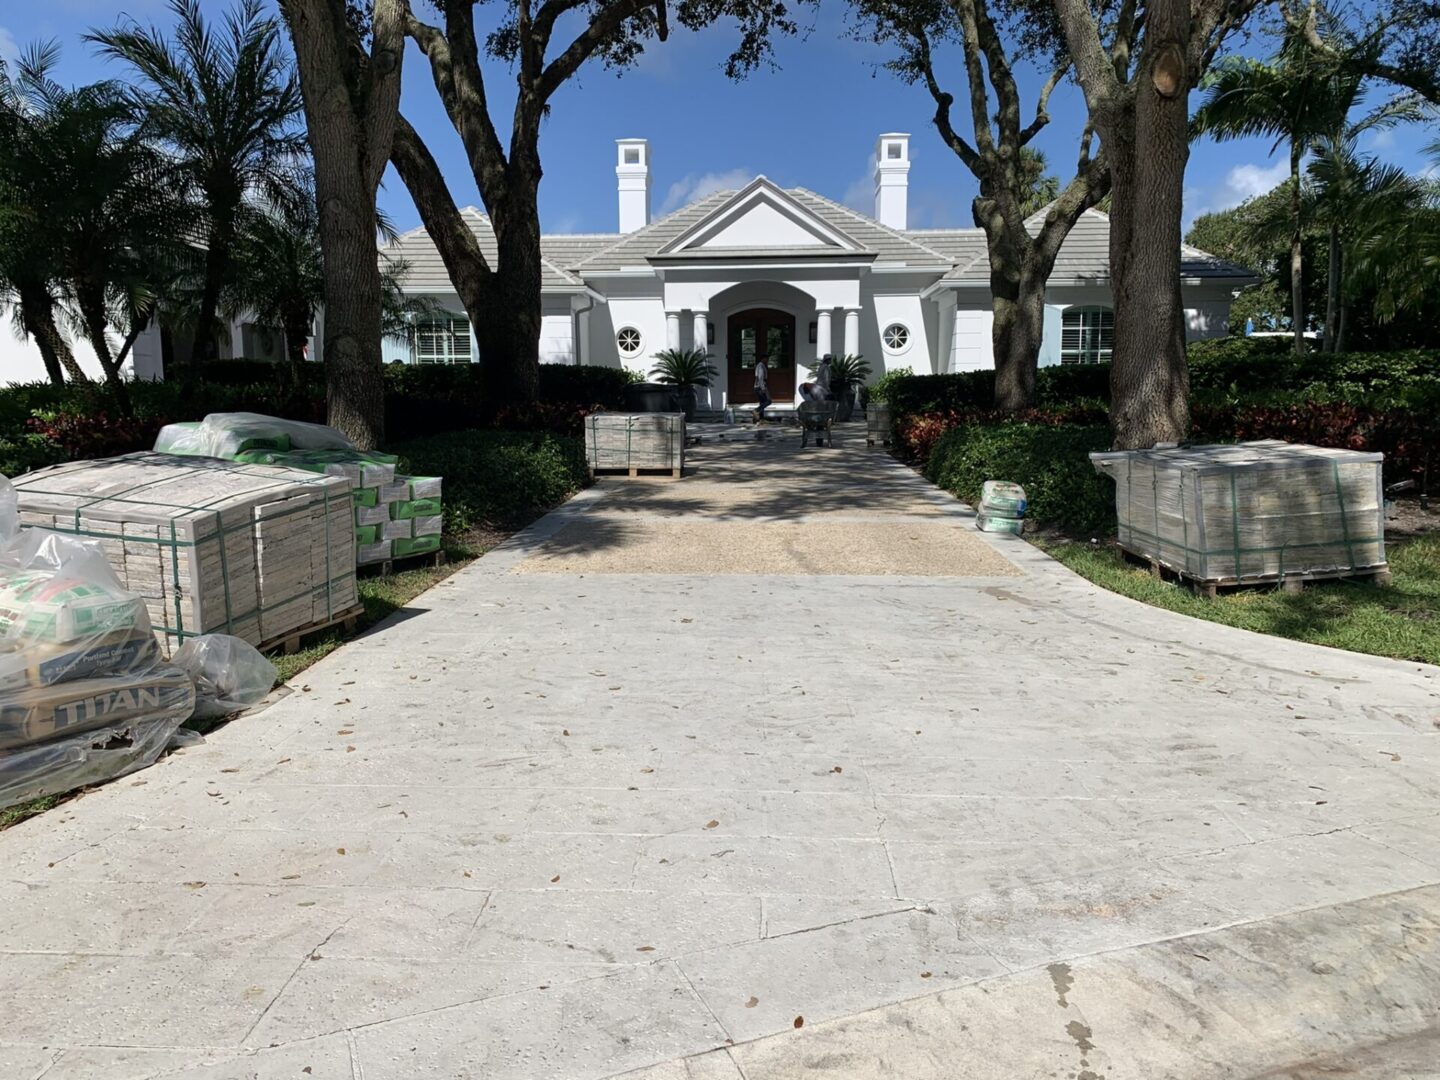 A large white house with trees and a driveway.